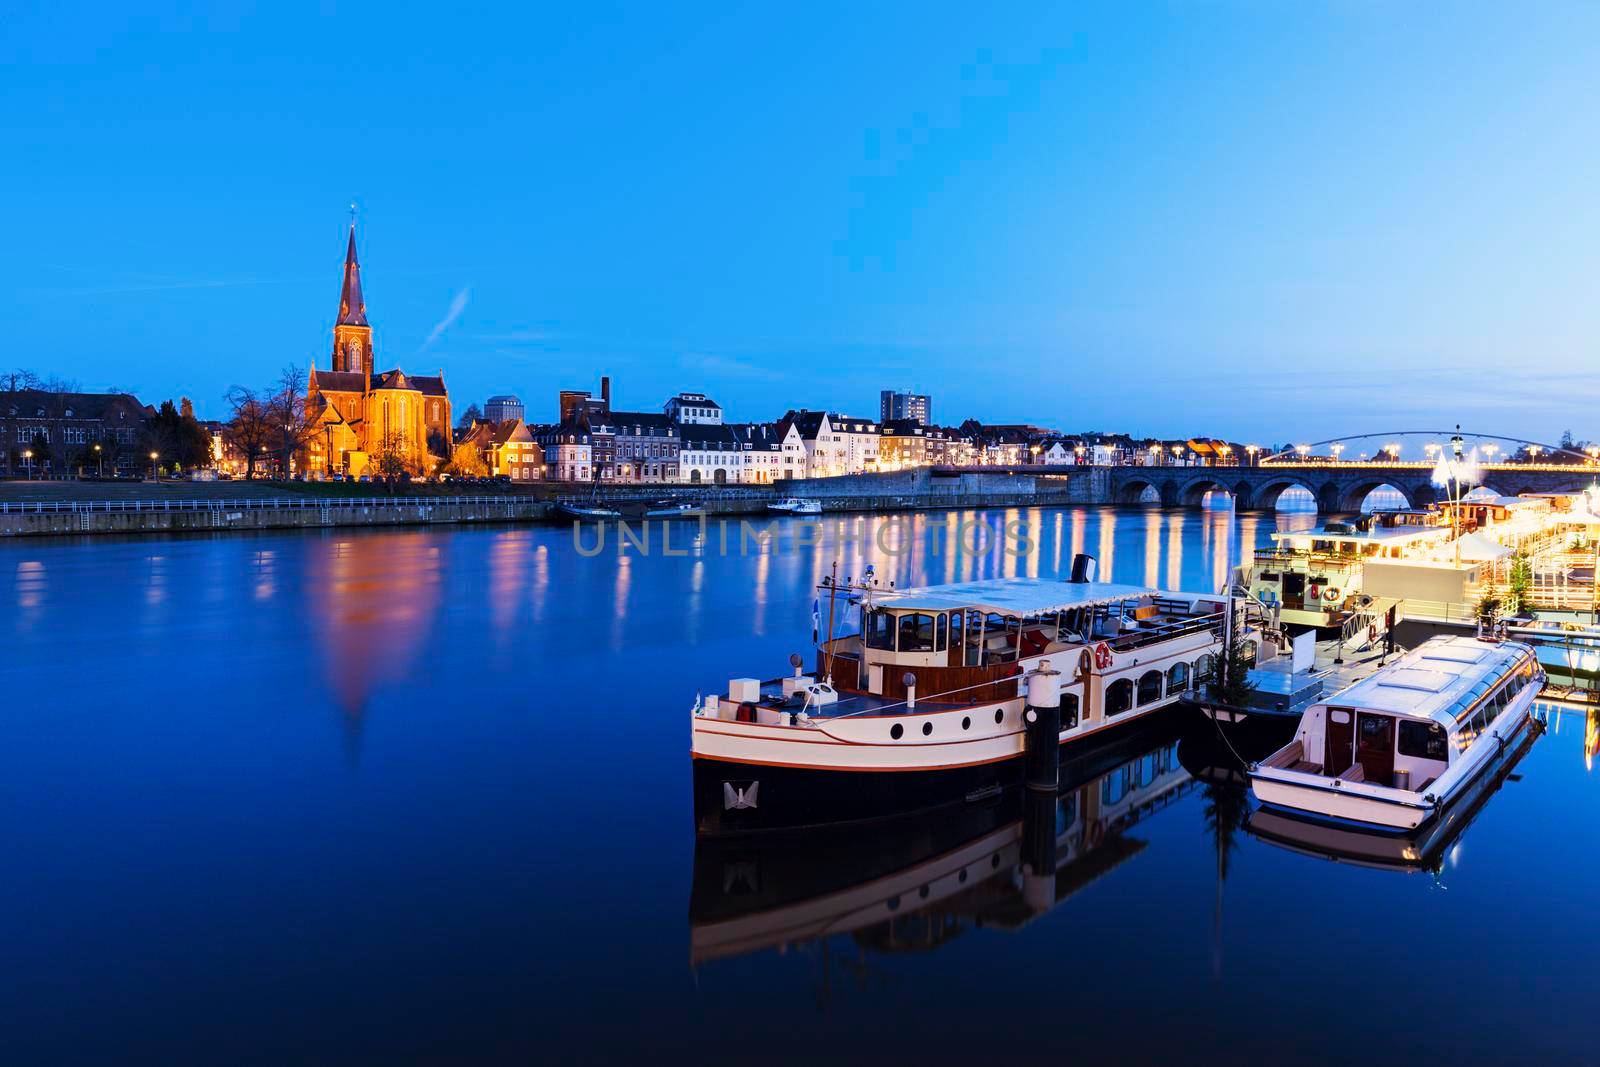 Meuse River in Maastricht by benkrut